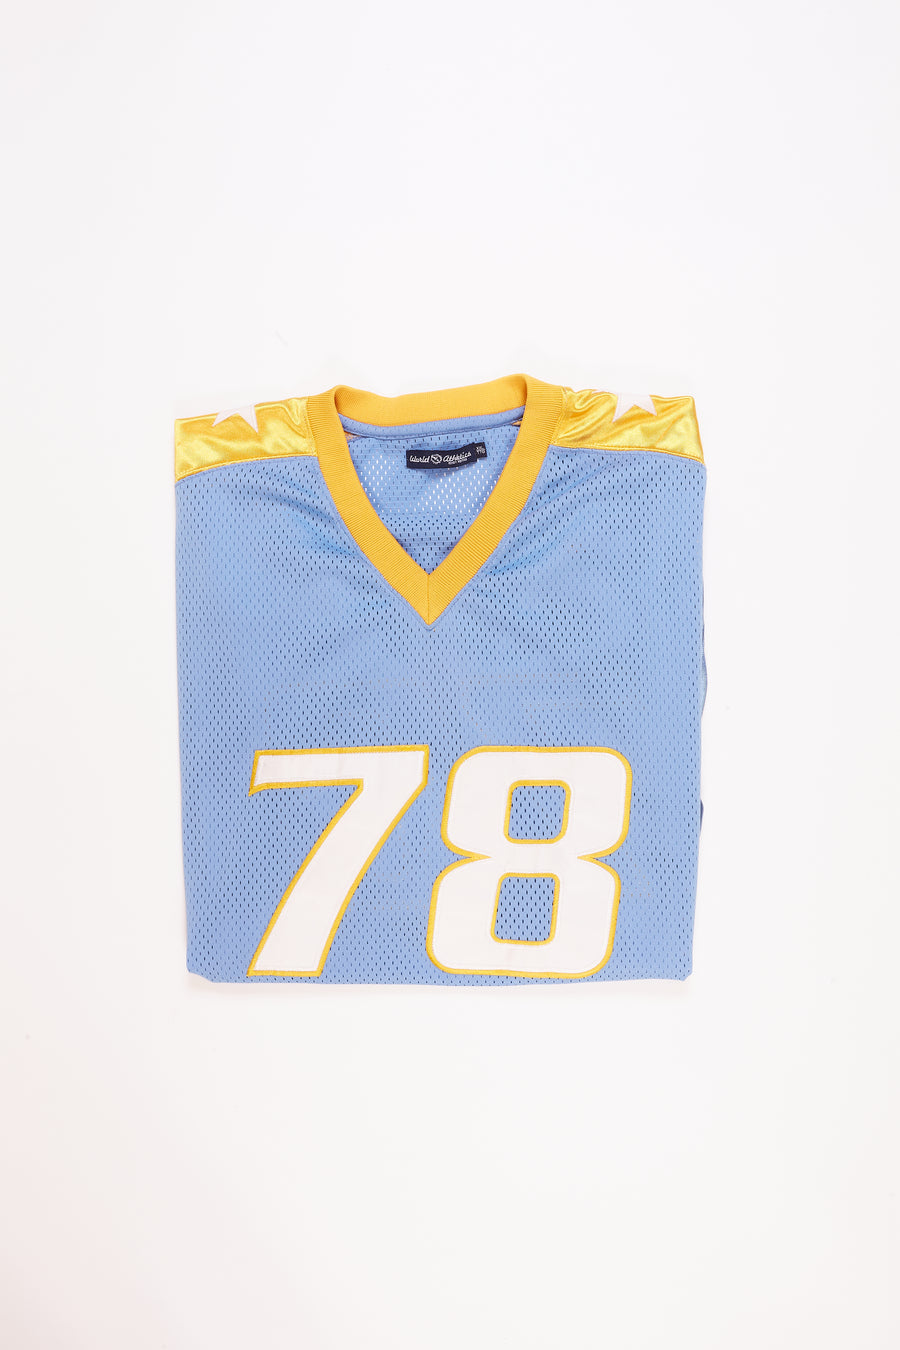 Early 2000s World Athletic Jersey in a vintage style from thrift store Twise Studio